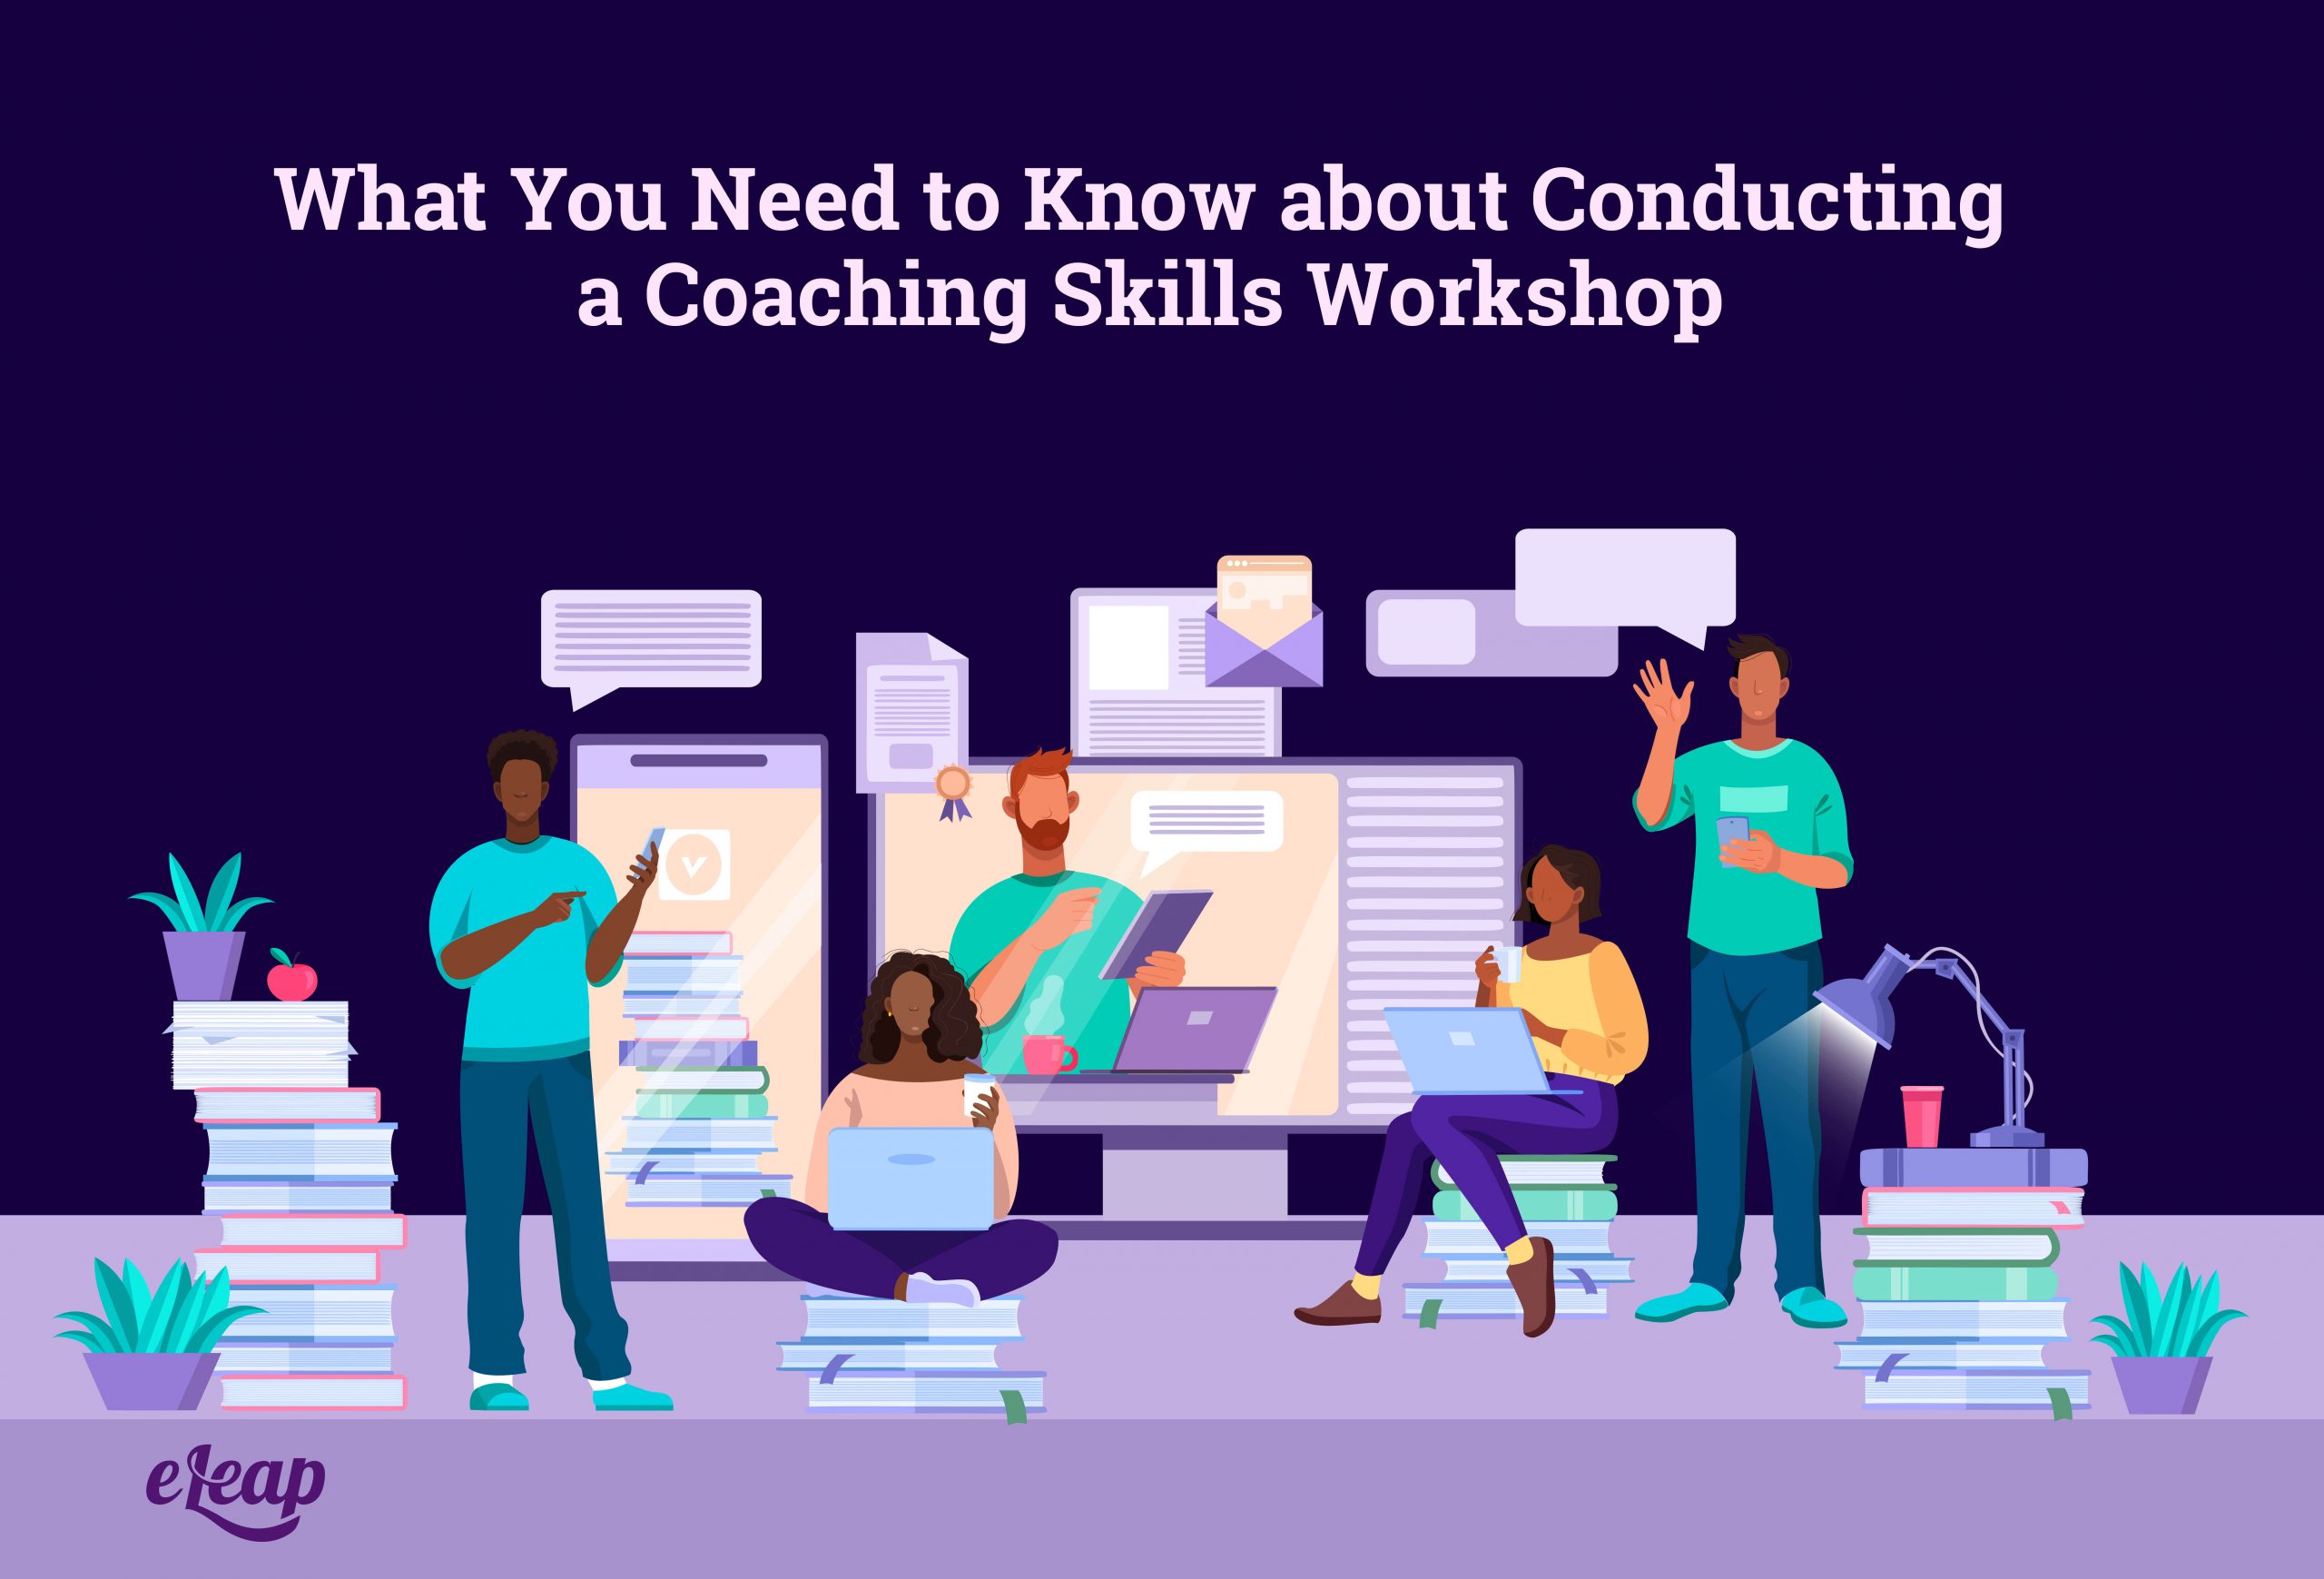 What You Need to Know about Conducting a Coaching Skills Workshop